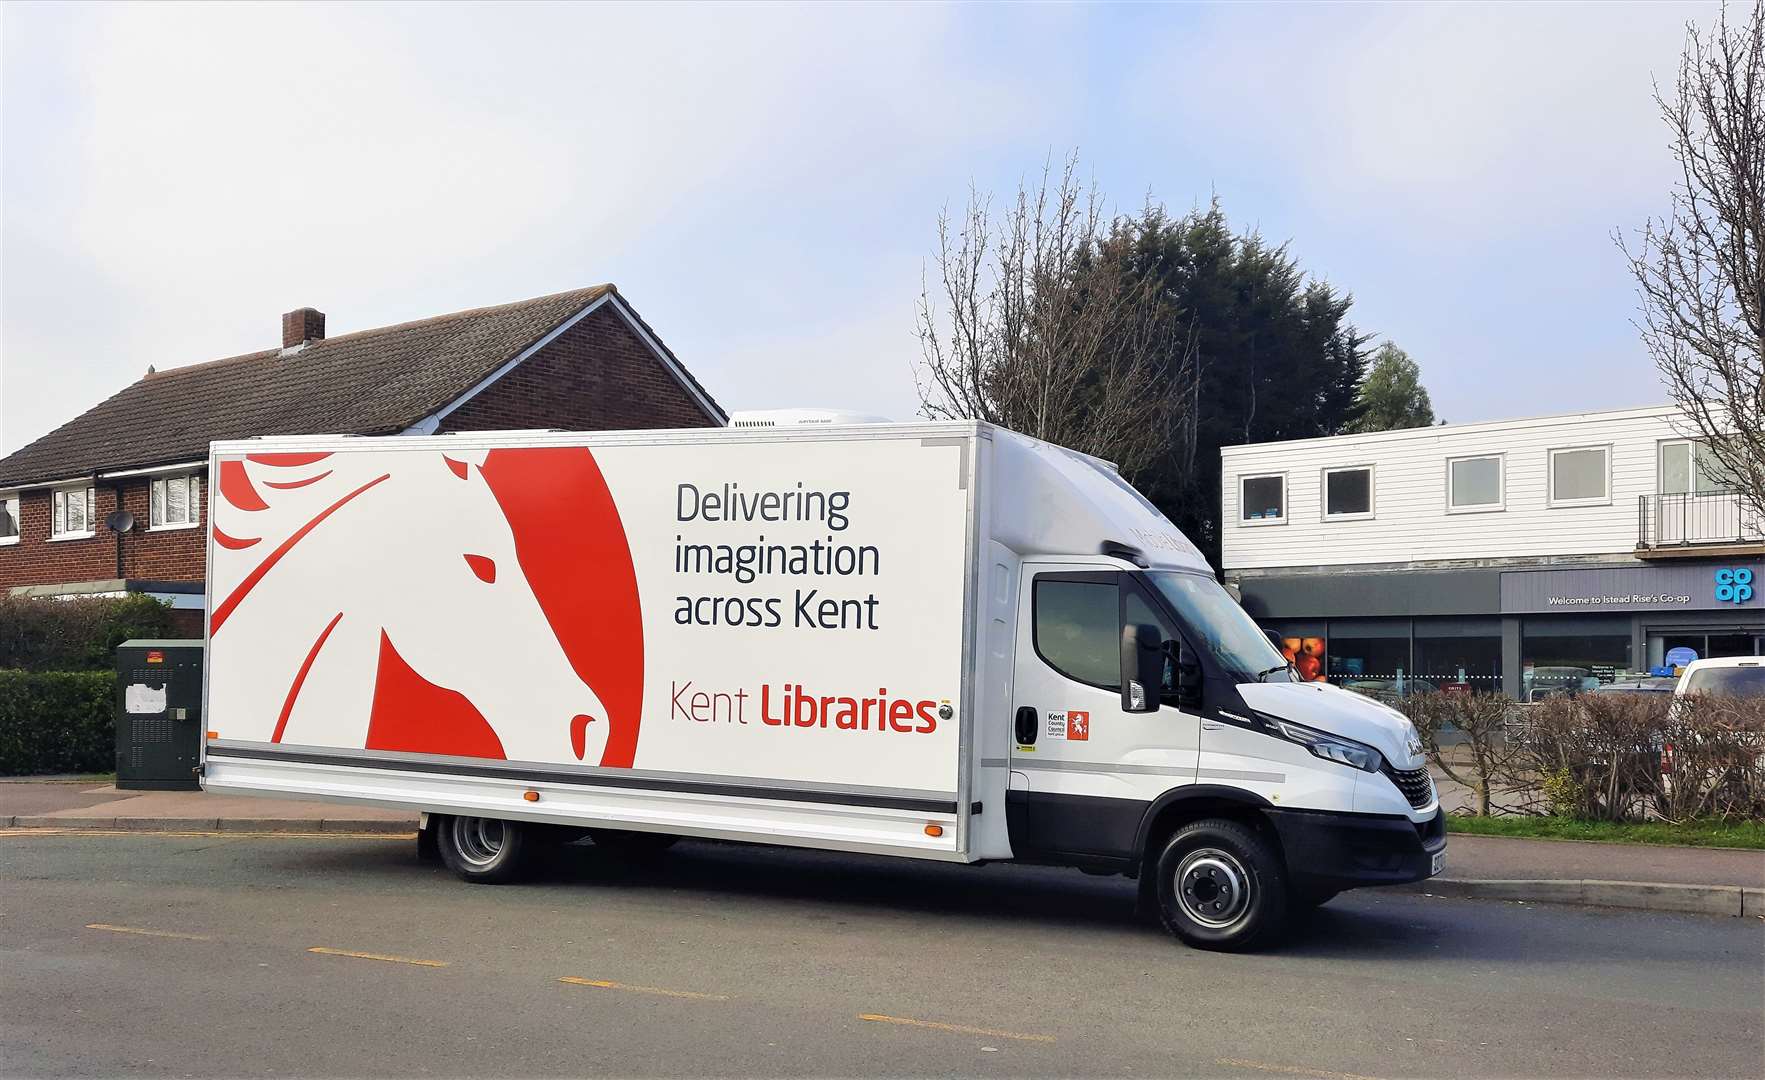 KCC's most modern library vans were only introduced in March this year